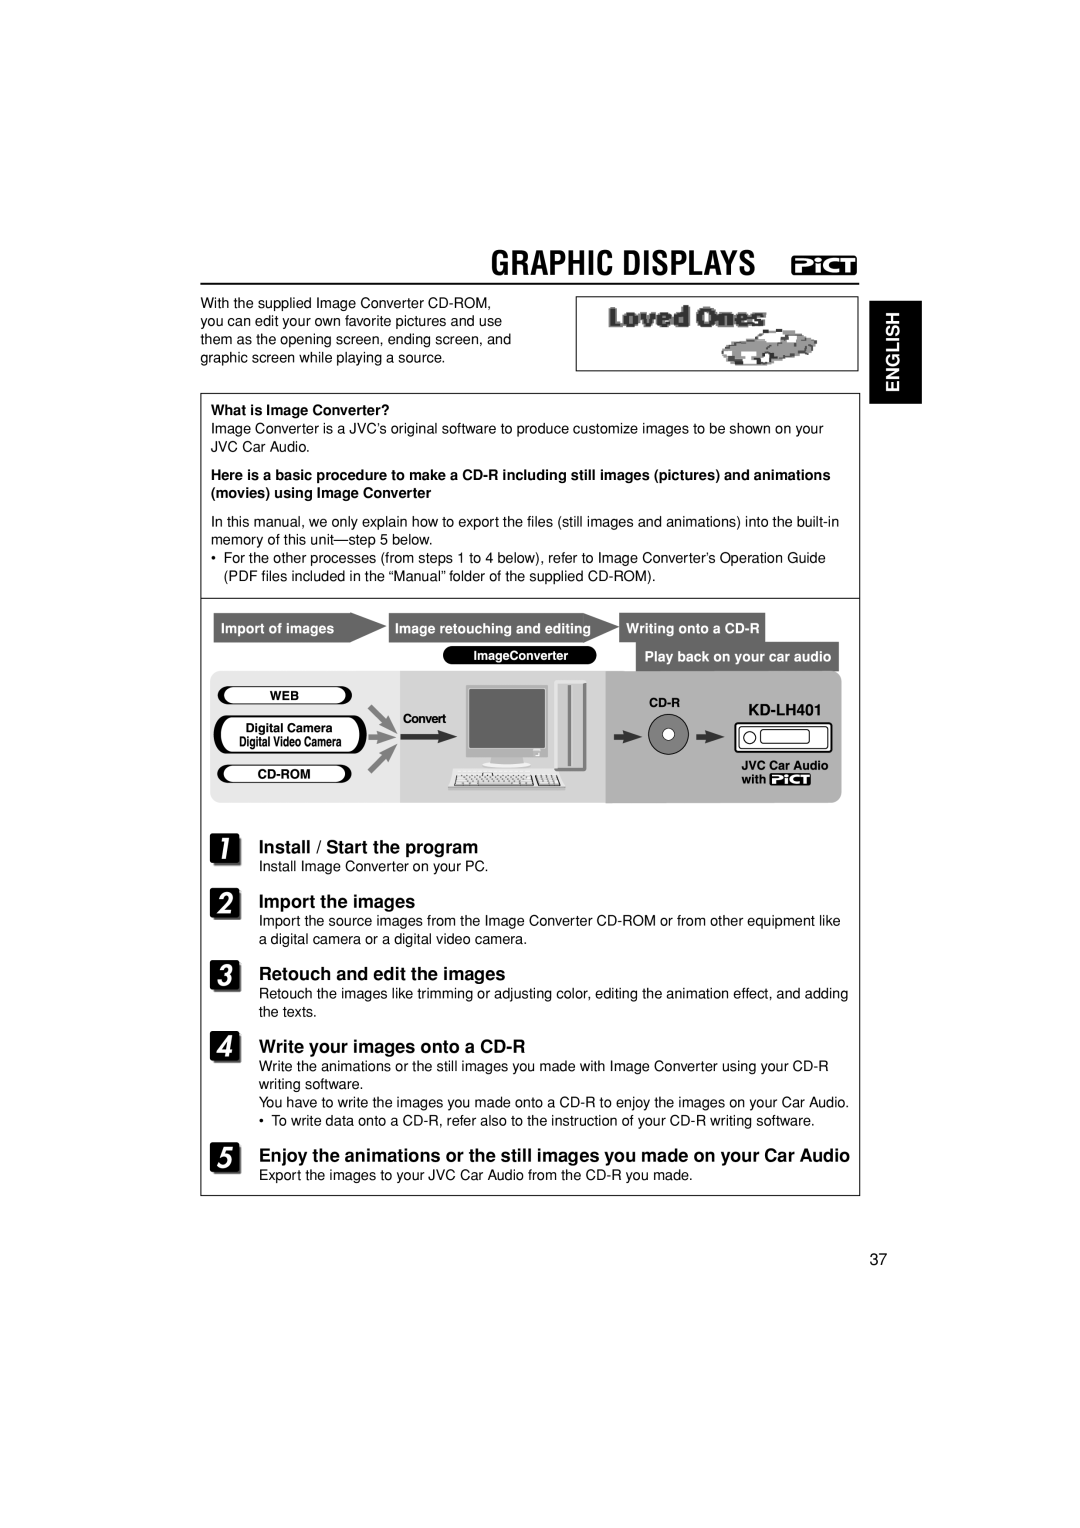 JVC KD-LH401 Graphic Displays, Install / Start the program, Import the images, Retouch and edit the images, English 